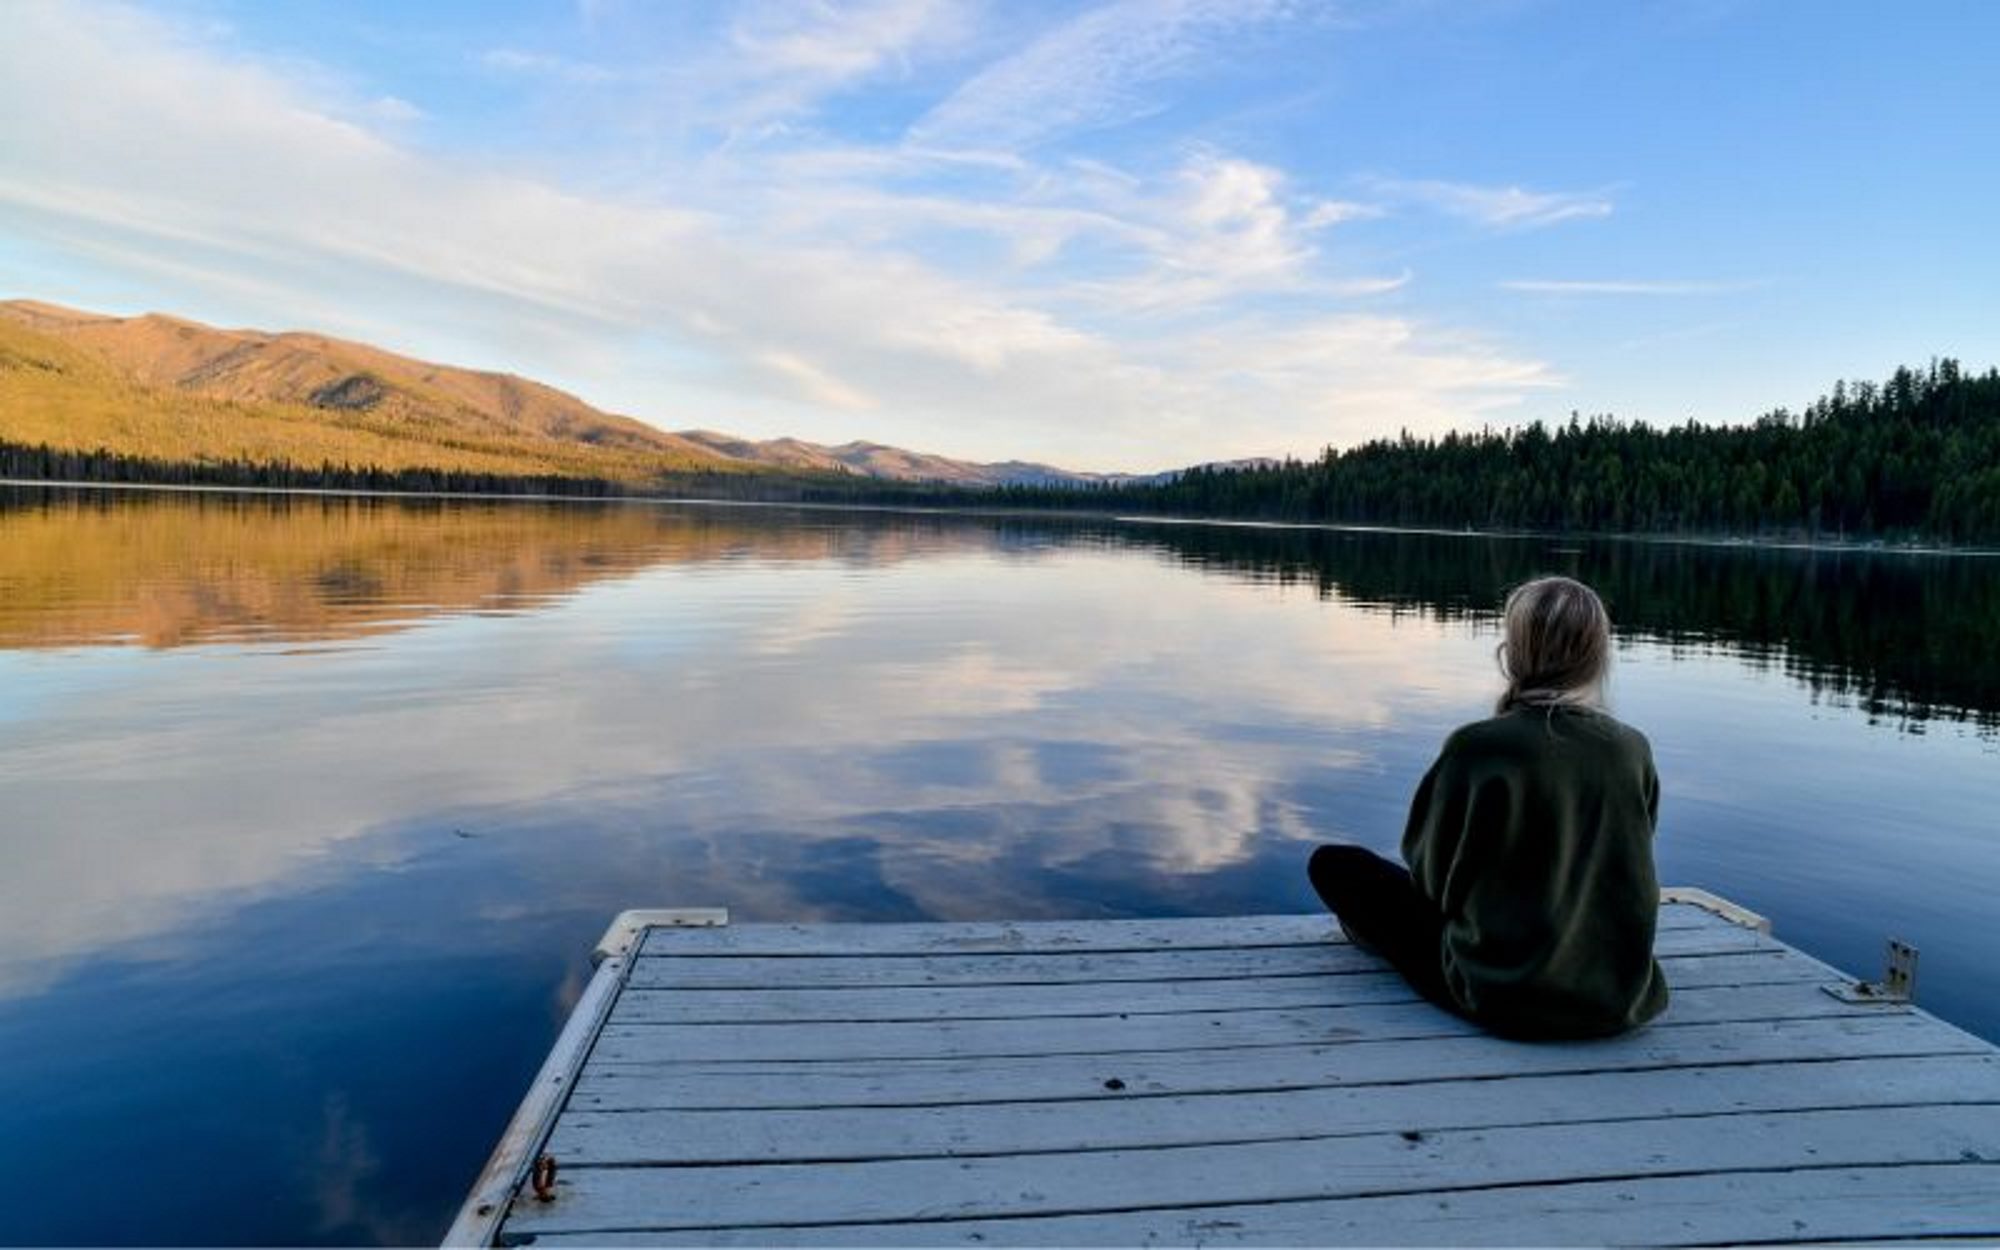 Spending time outdoors by a peaceful quiet lake to improve mental health.